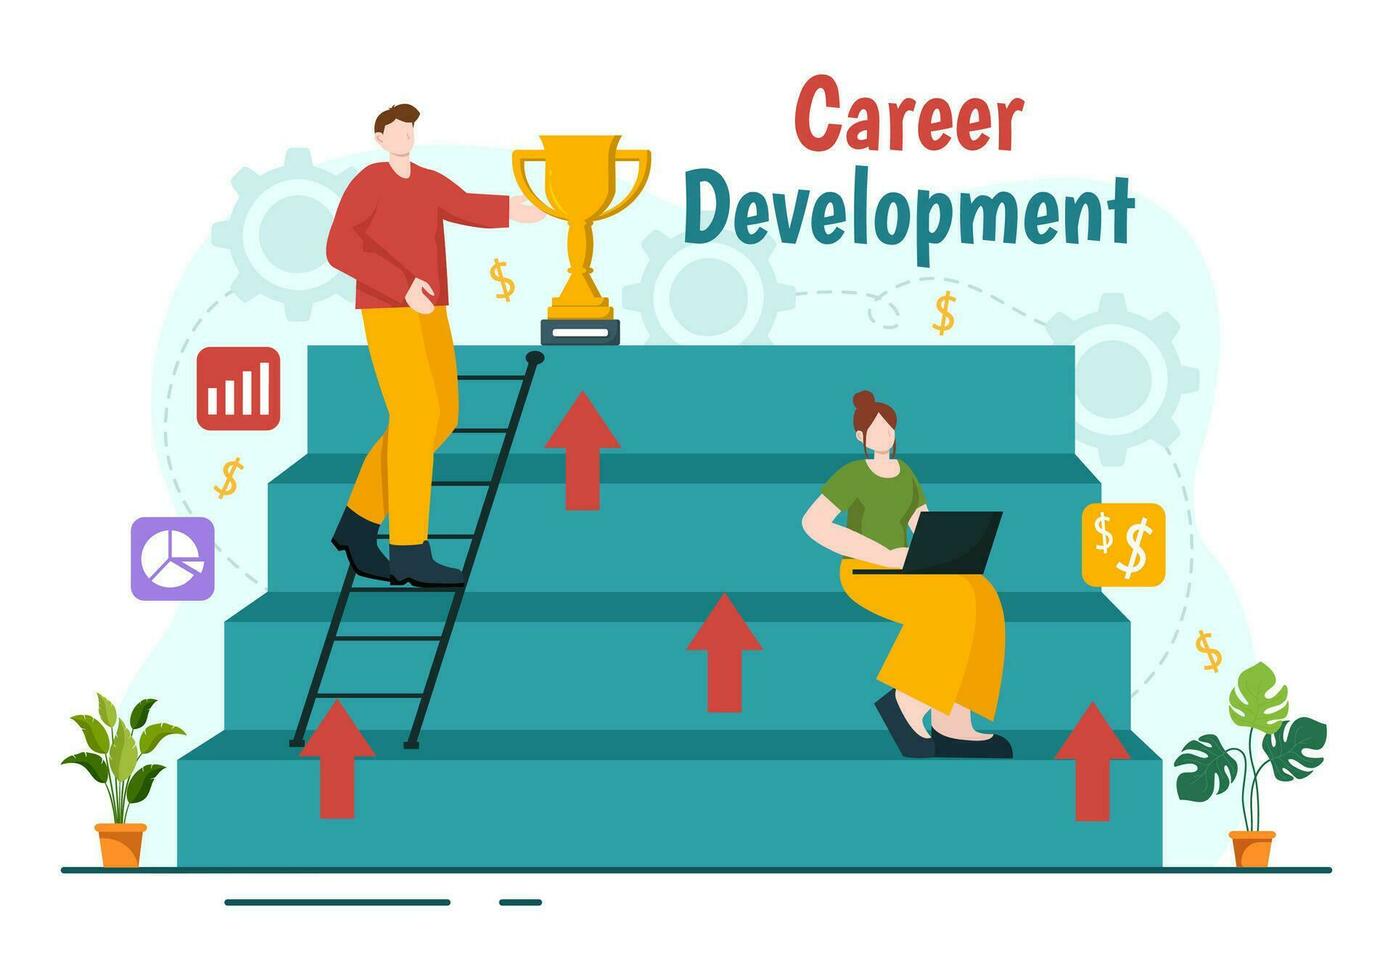 Career Development Vector Illustration with Ladder to Success and Growing Revenue on Improve Bar Graph in Business Goal Flat Background Design